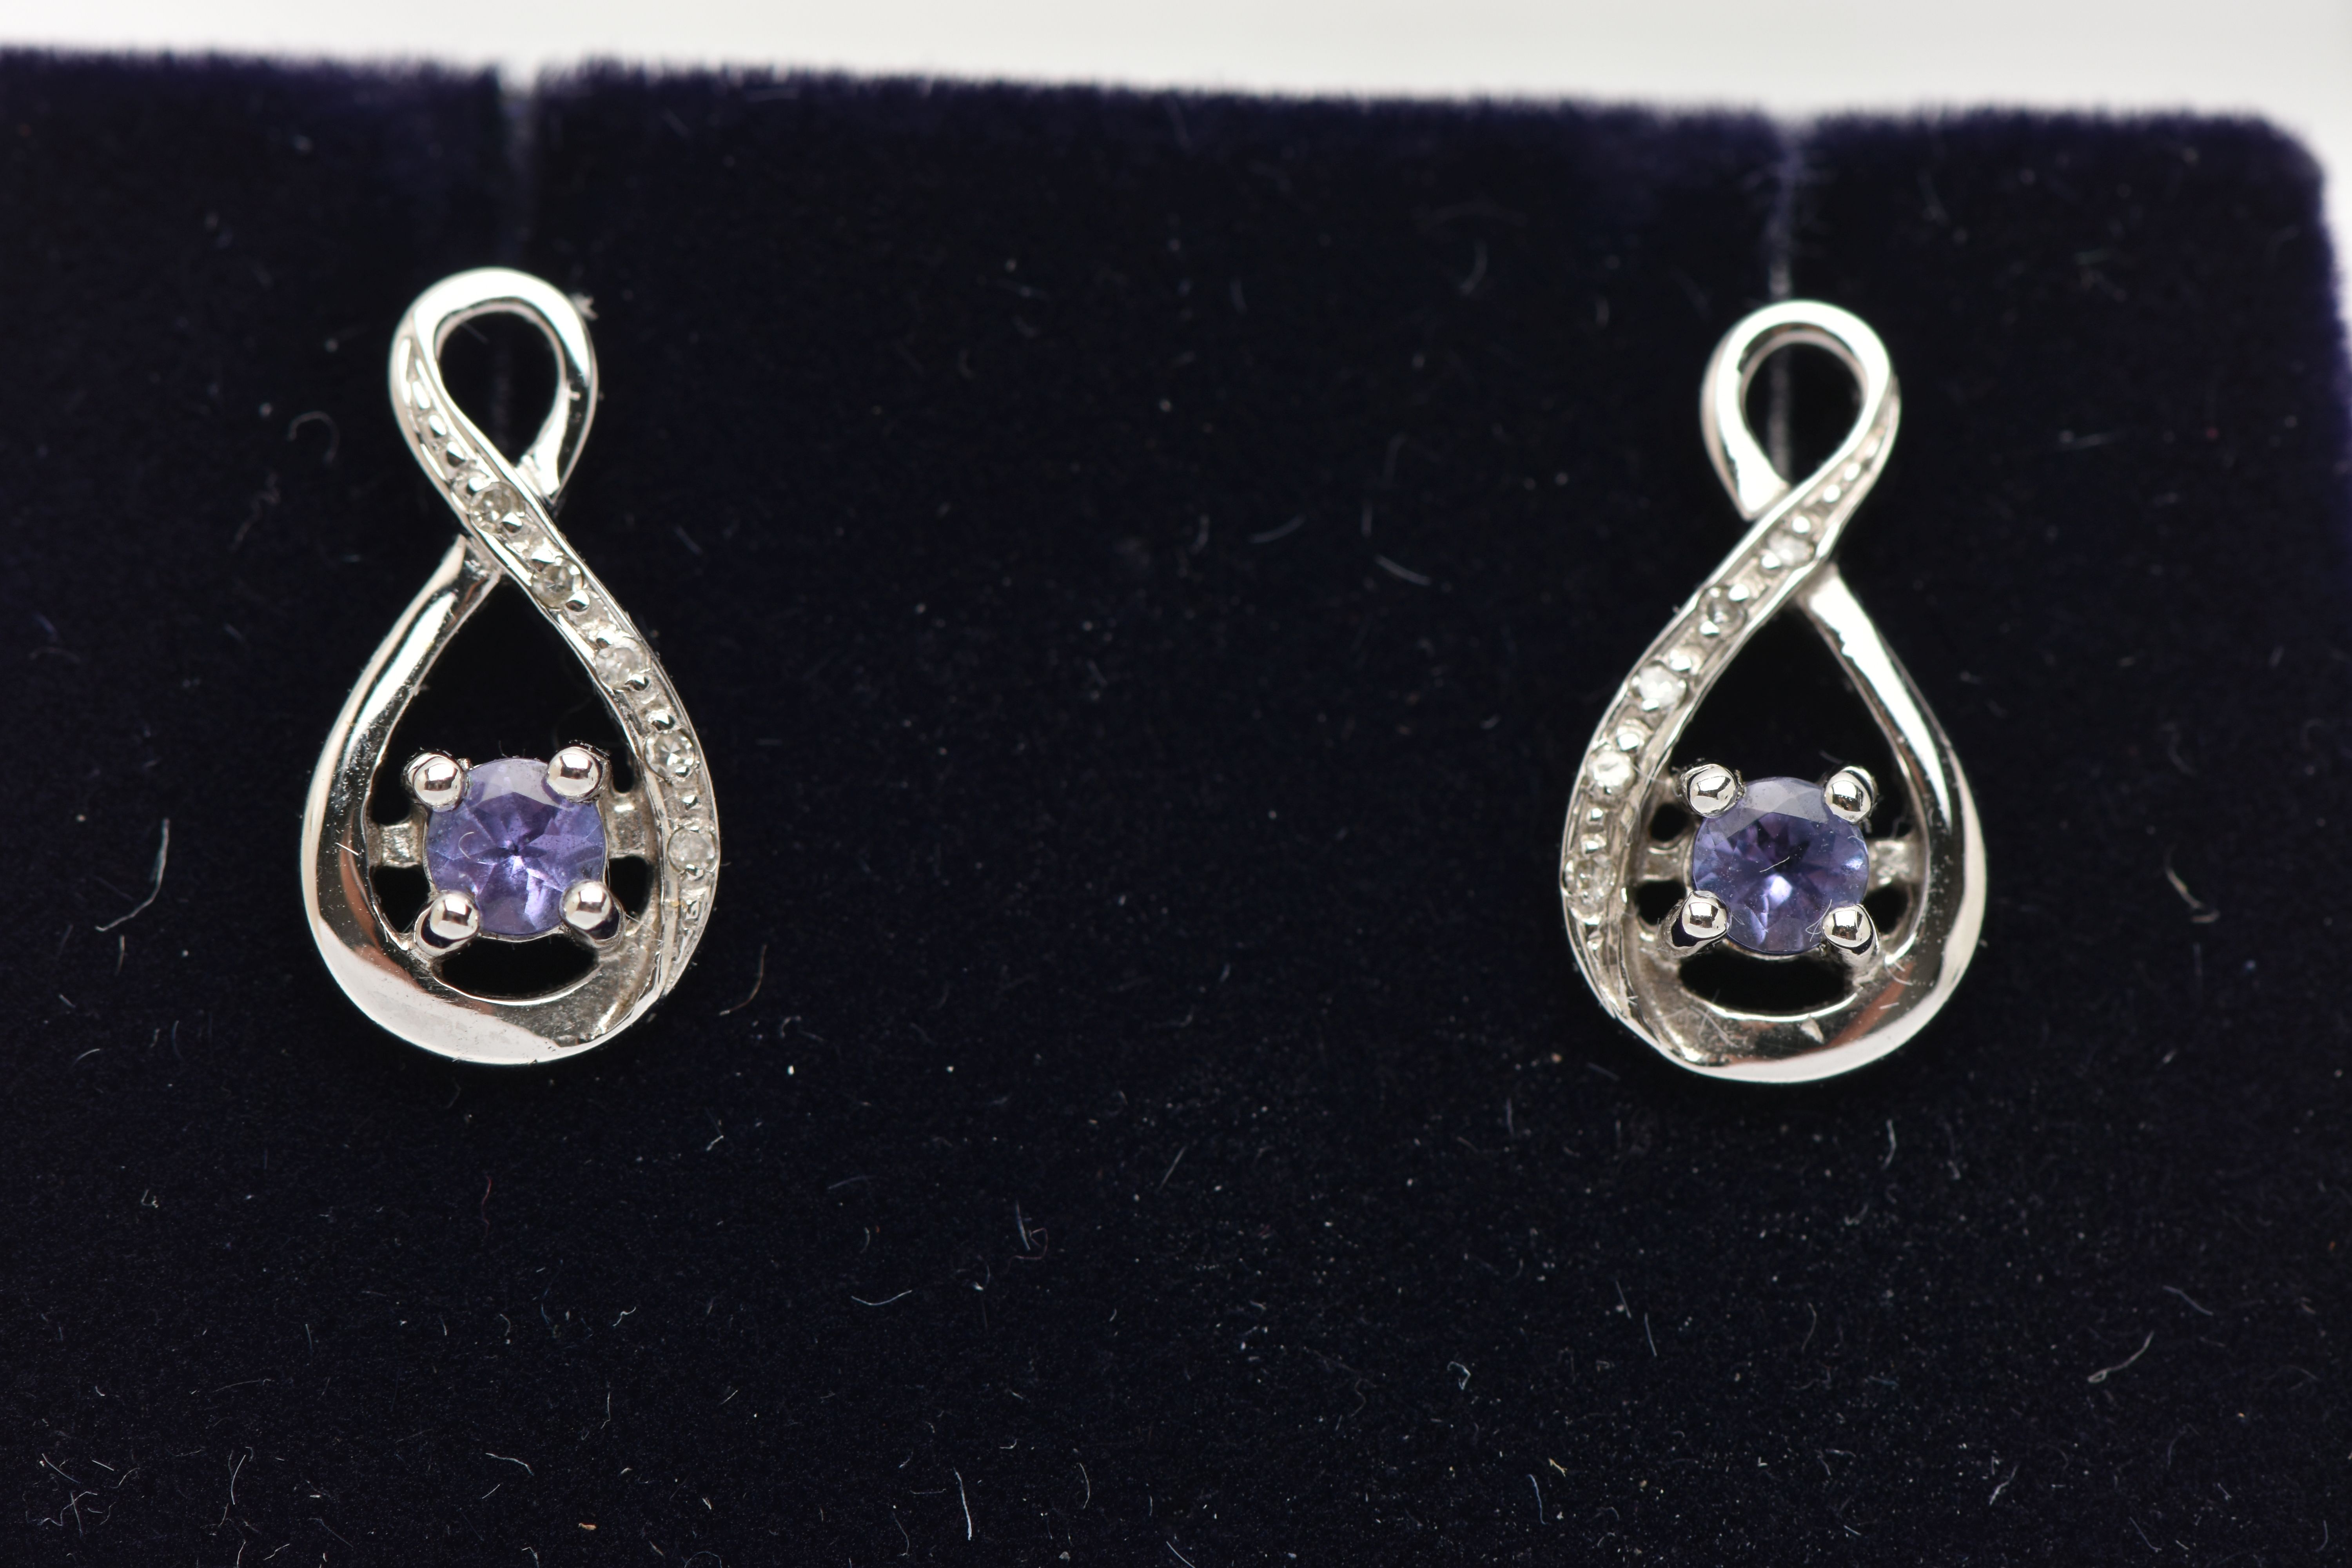 A BOXED PAIR OF 9CT WHITE GOLD TANZANITE AND DIAMOND SET EARRINGS, each earring set with a small